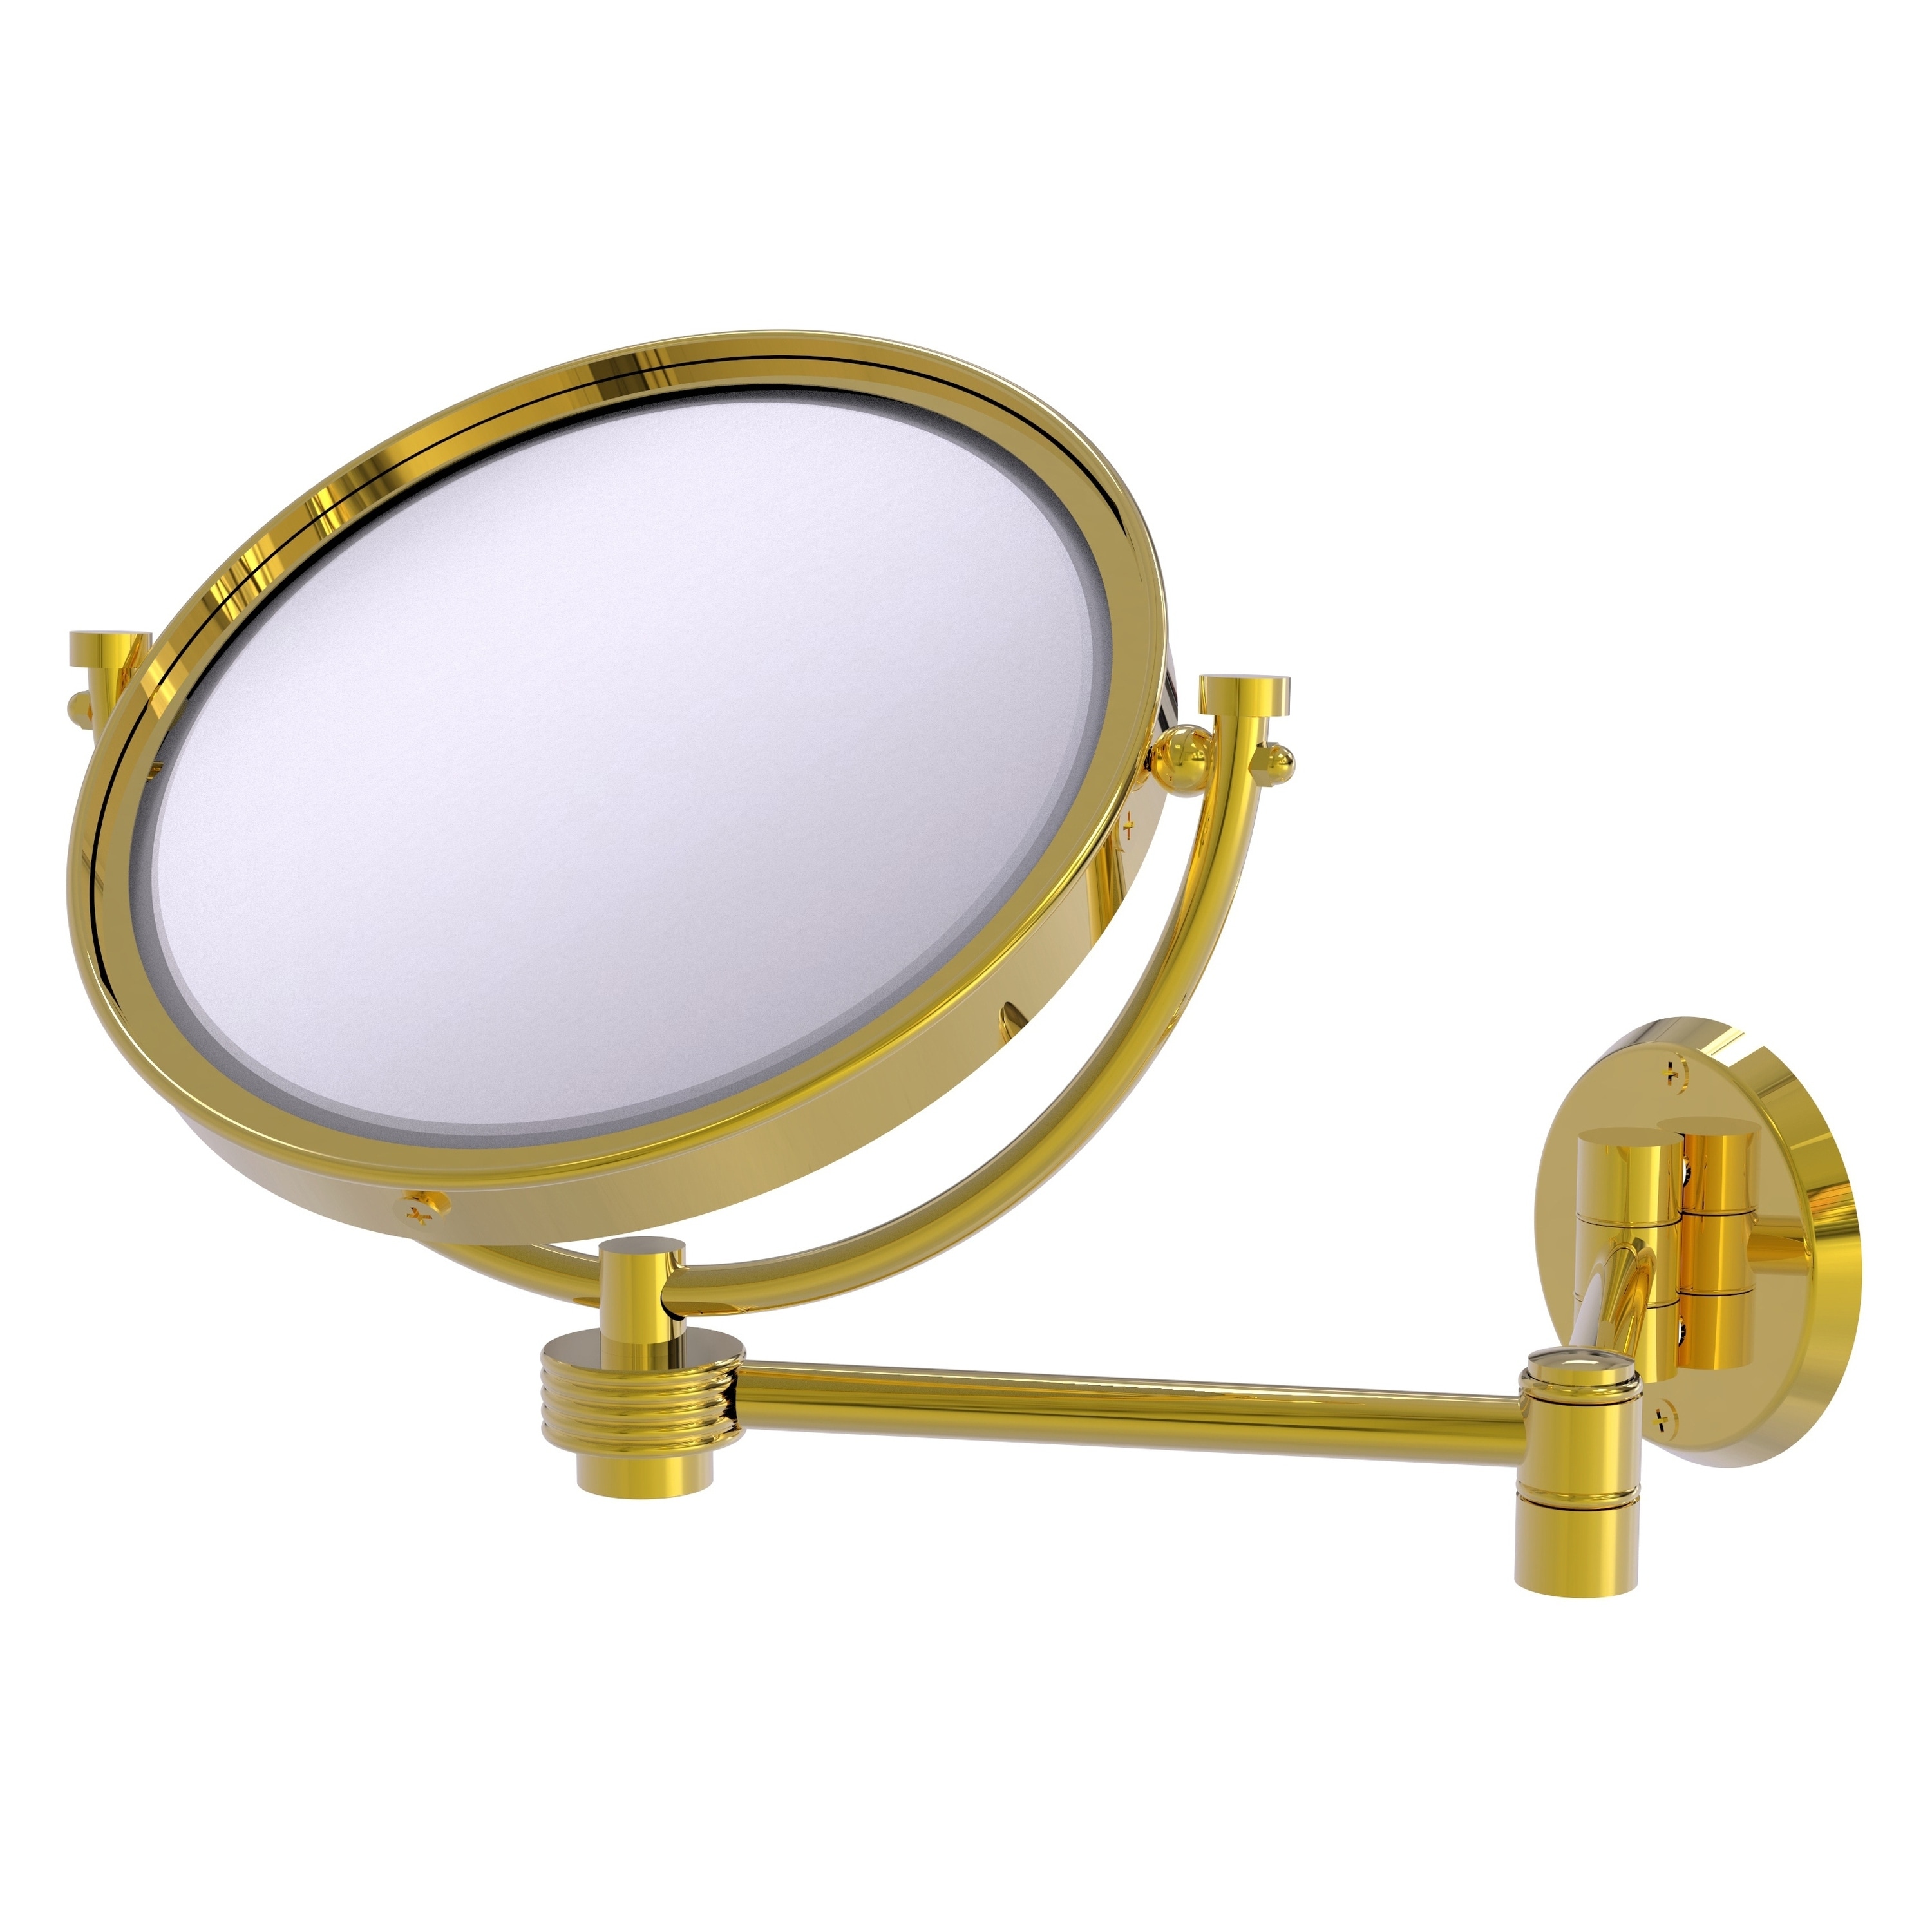 8-in x 10-in Polished Silver Double-sided 5X Magnifying Wall-mounted Vanity Mirror | - Allied Brass WM-6G/4X-PB